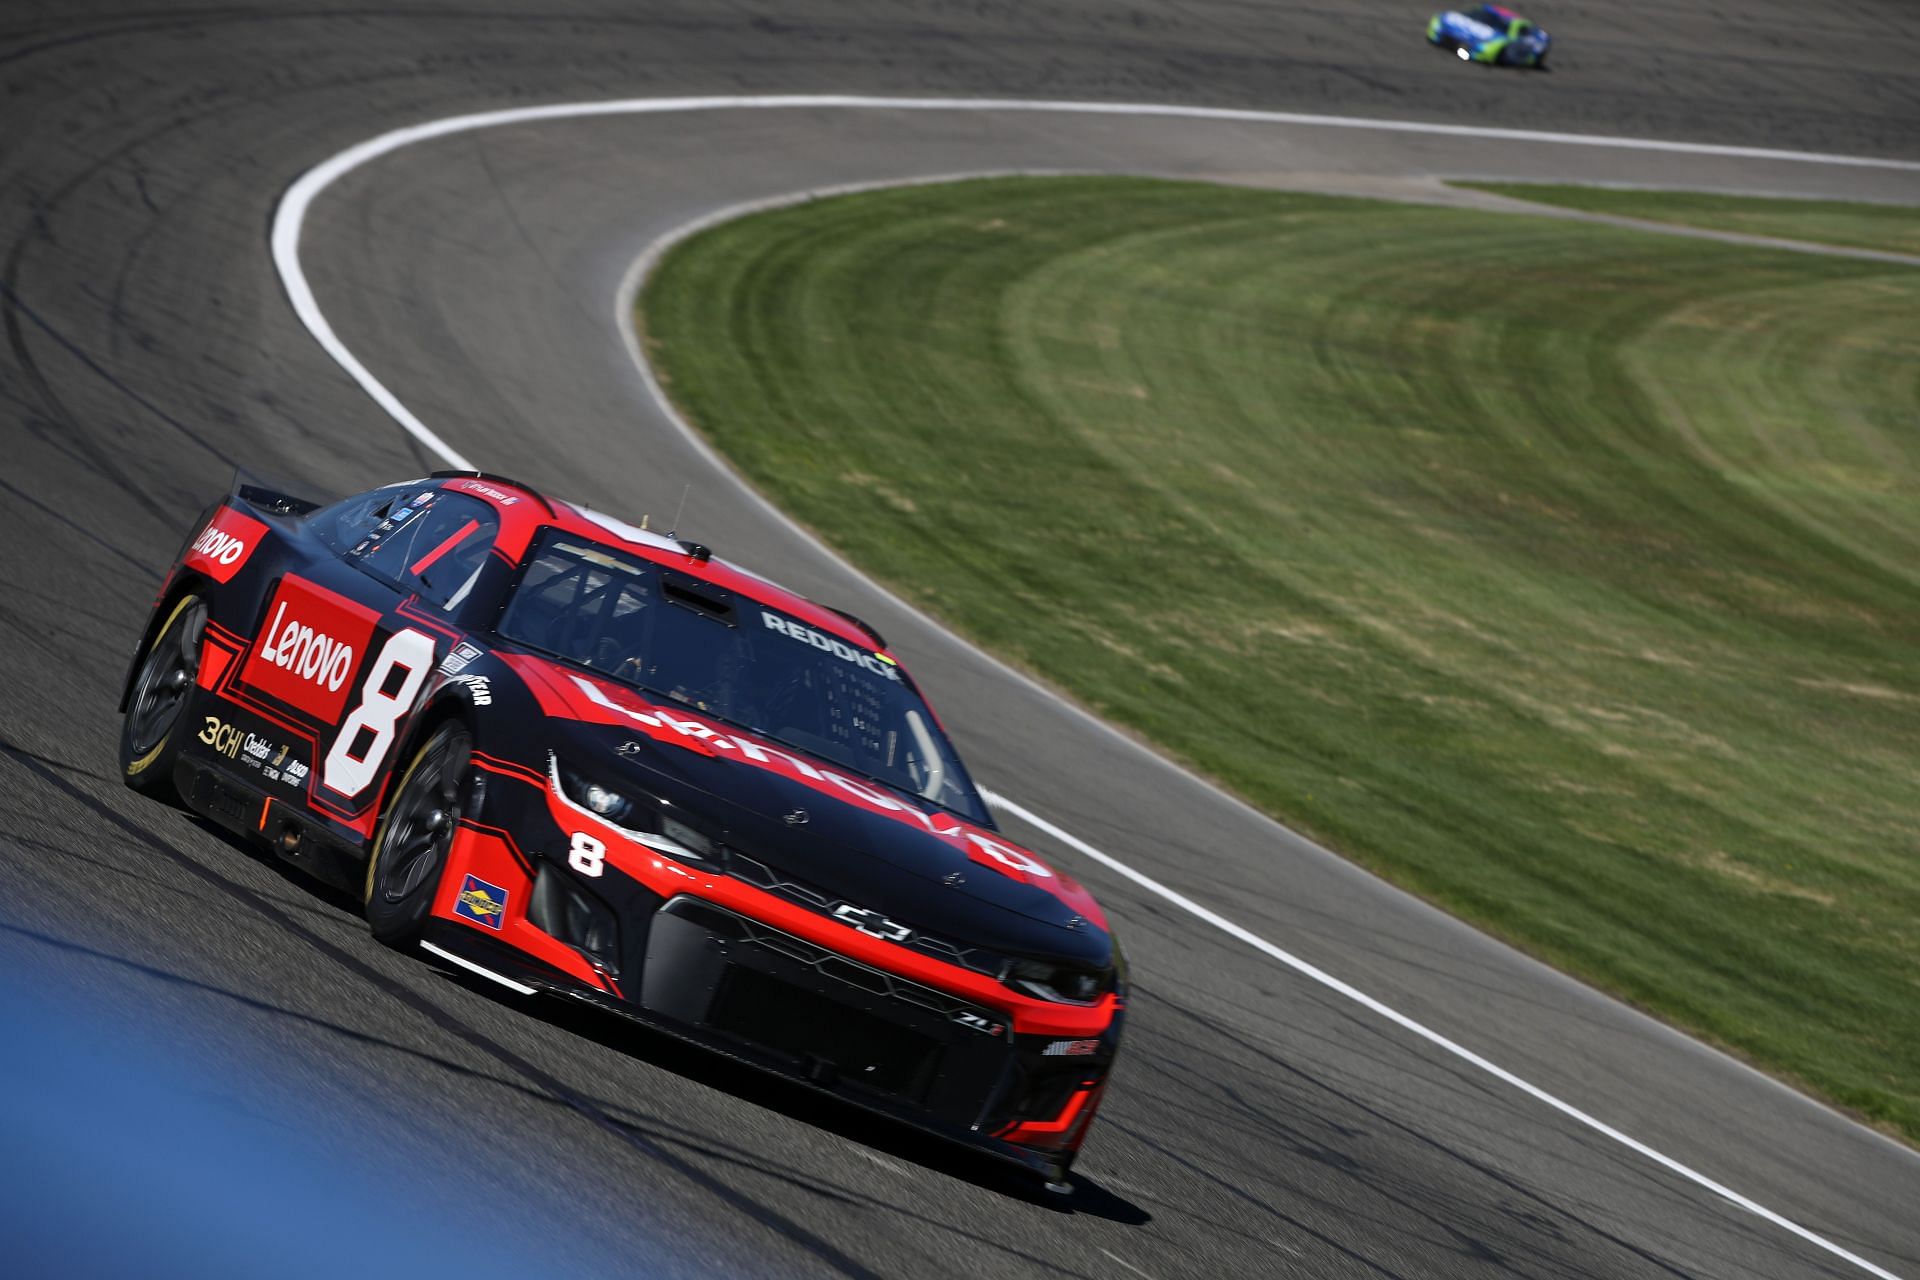 Tyler Reddick, in the #8 Lenovo Chevrolet Camaro ZL1 during practice for the NASCAR Cup Series WISE Power 400 at Auto Club Speedway (Photo by Meg Oliphant/Getty Images)